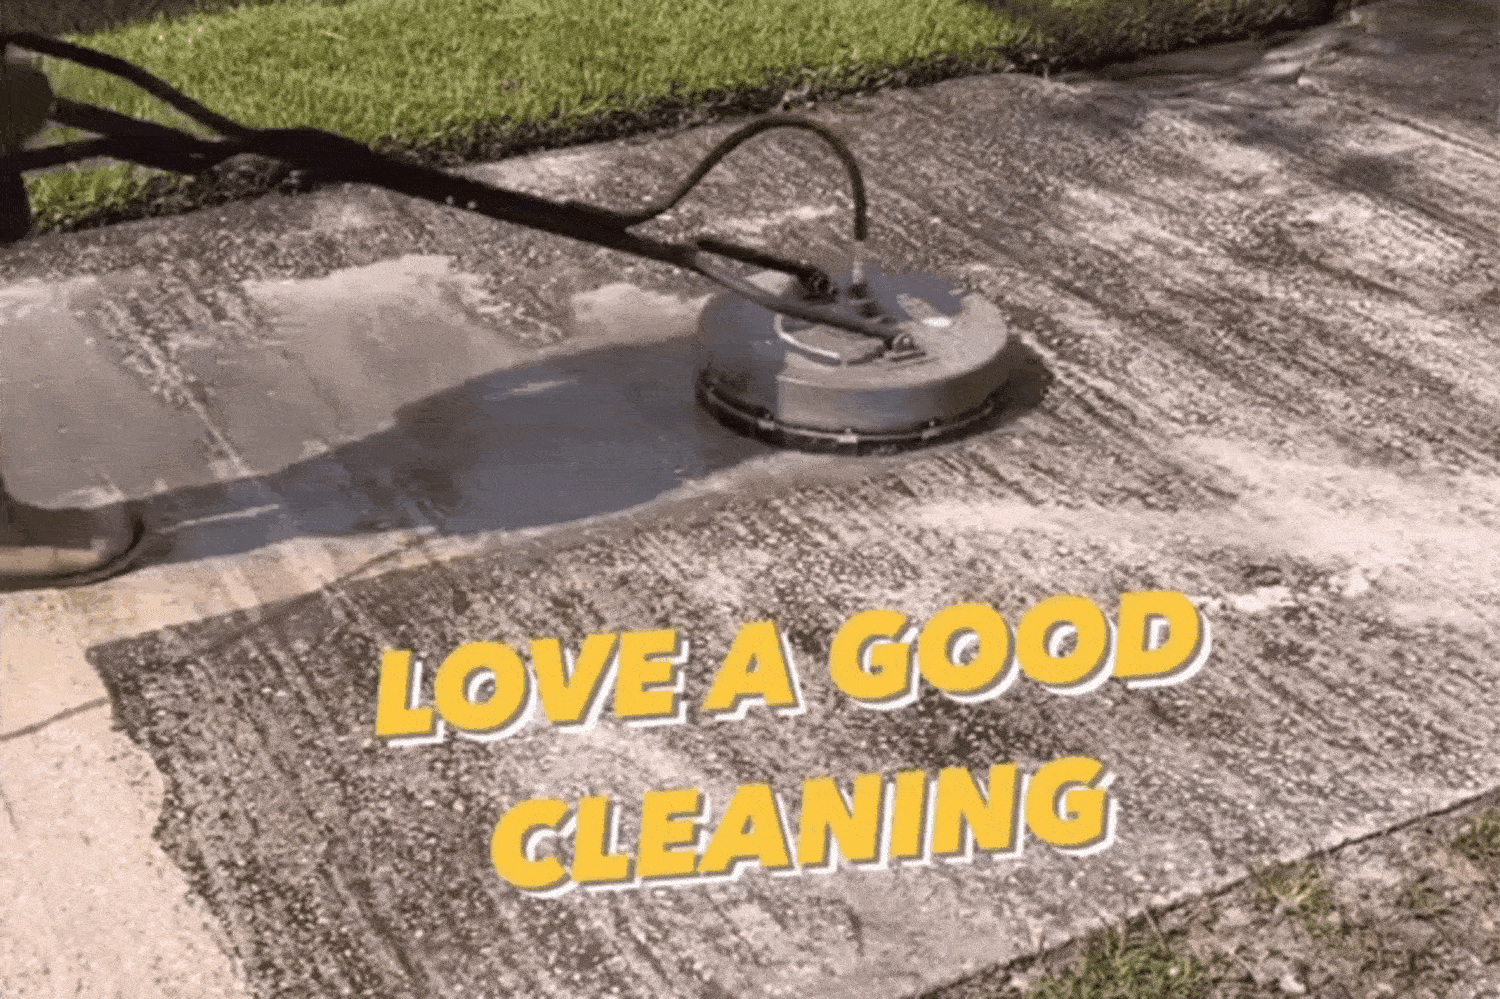 Tools By Design Cleaning Driveway